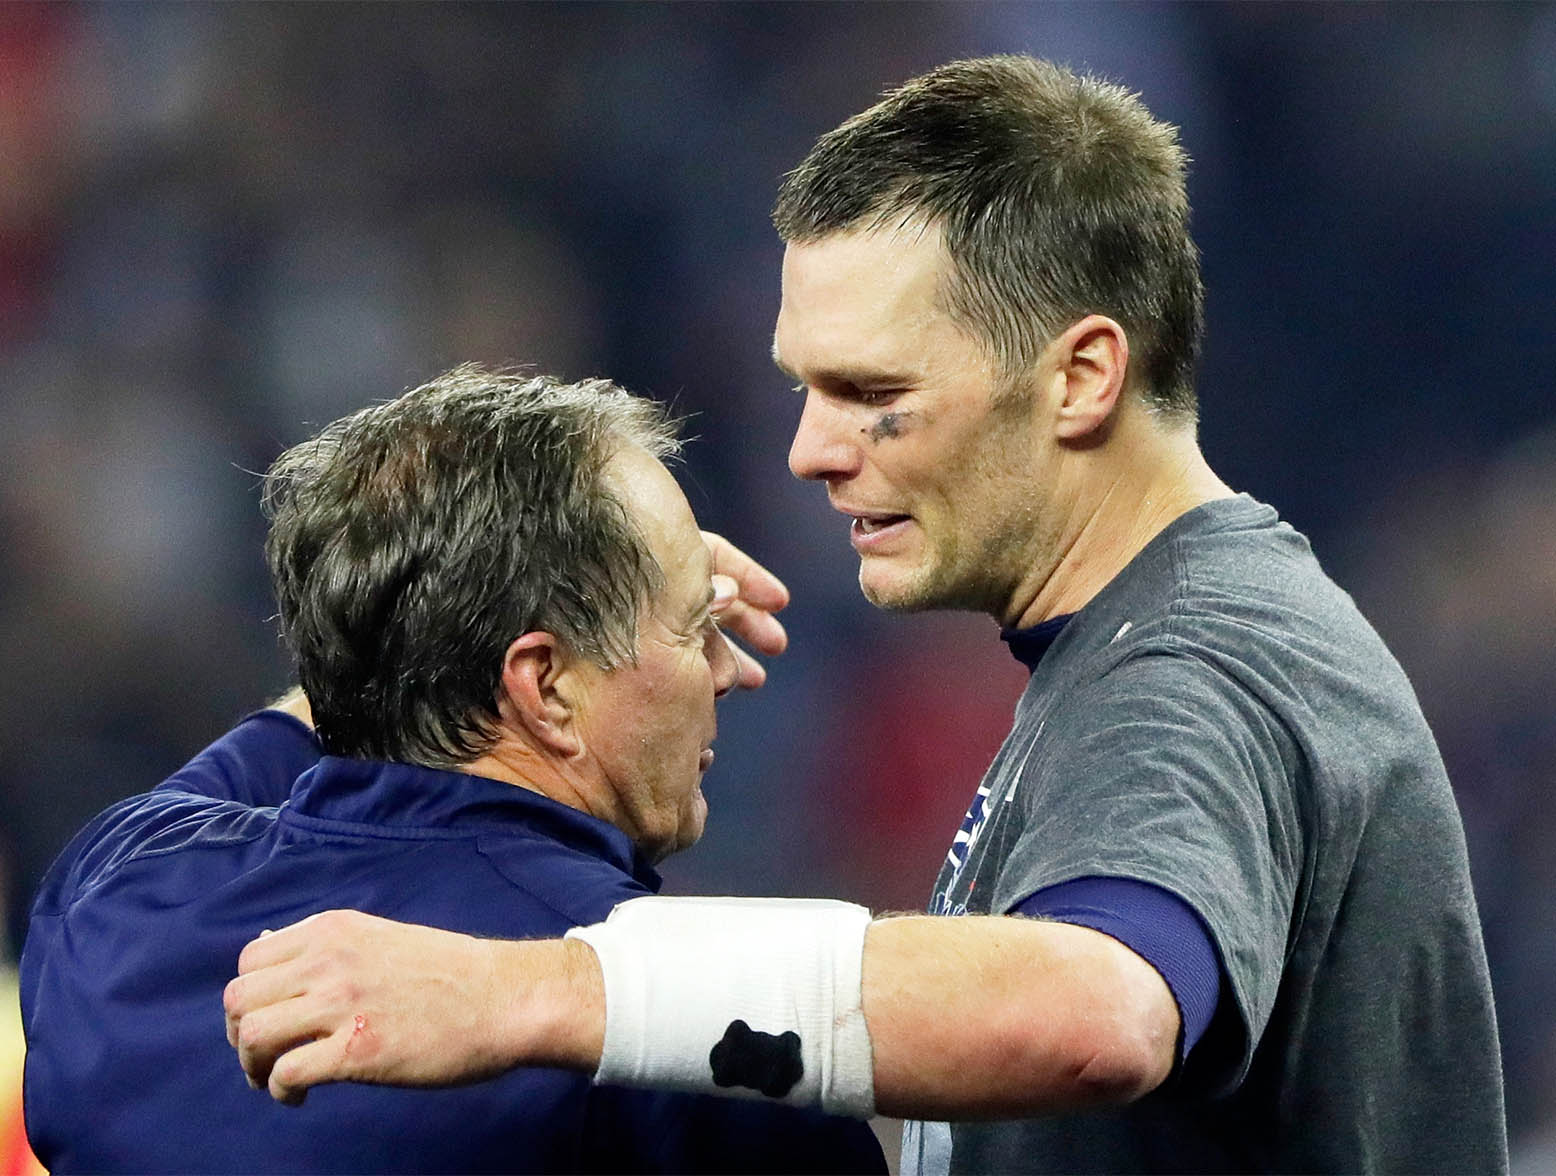 HOUSTON, TX - FEBRUARY 05: Head coach Bill Belichick of the New England Patriots and Tom Brady #12 celebrate after winning 34-28 over the Atlanta Falcons in Super Bowl 51 at NRG Stadium on February 5, 2017 in Houston, Texas. (Photo by Jamie Squire/Getty Images)